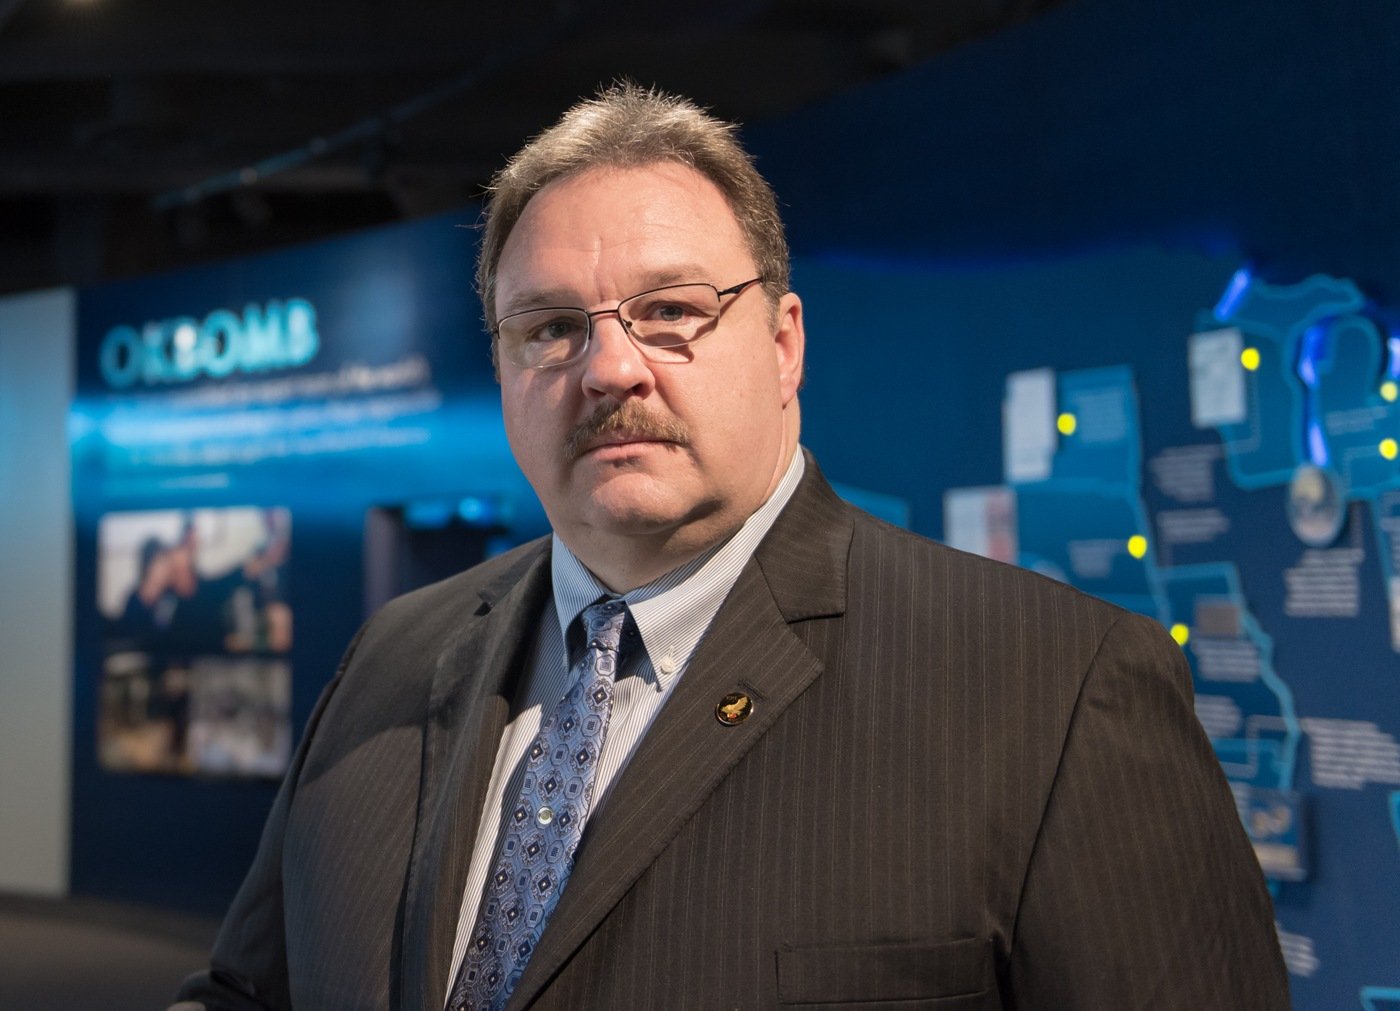 Special Agent Barry Black inside the Oklahoma City National Memorial & Museum. He was one of the first FBI agents on the scene after the bombing of the Alfred P. Murrah Federal Building in Oklahoma City on April 19, 1995, the deadliest act of homegrown terrorism in U.S. history.